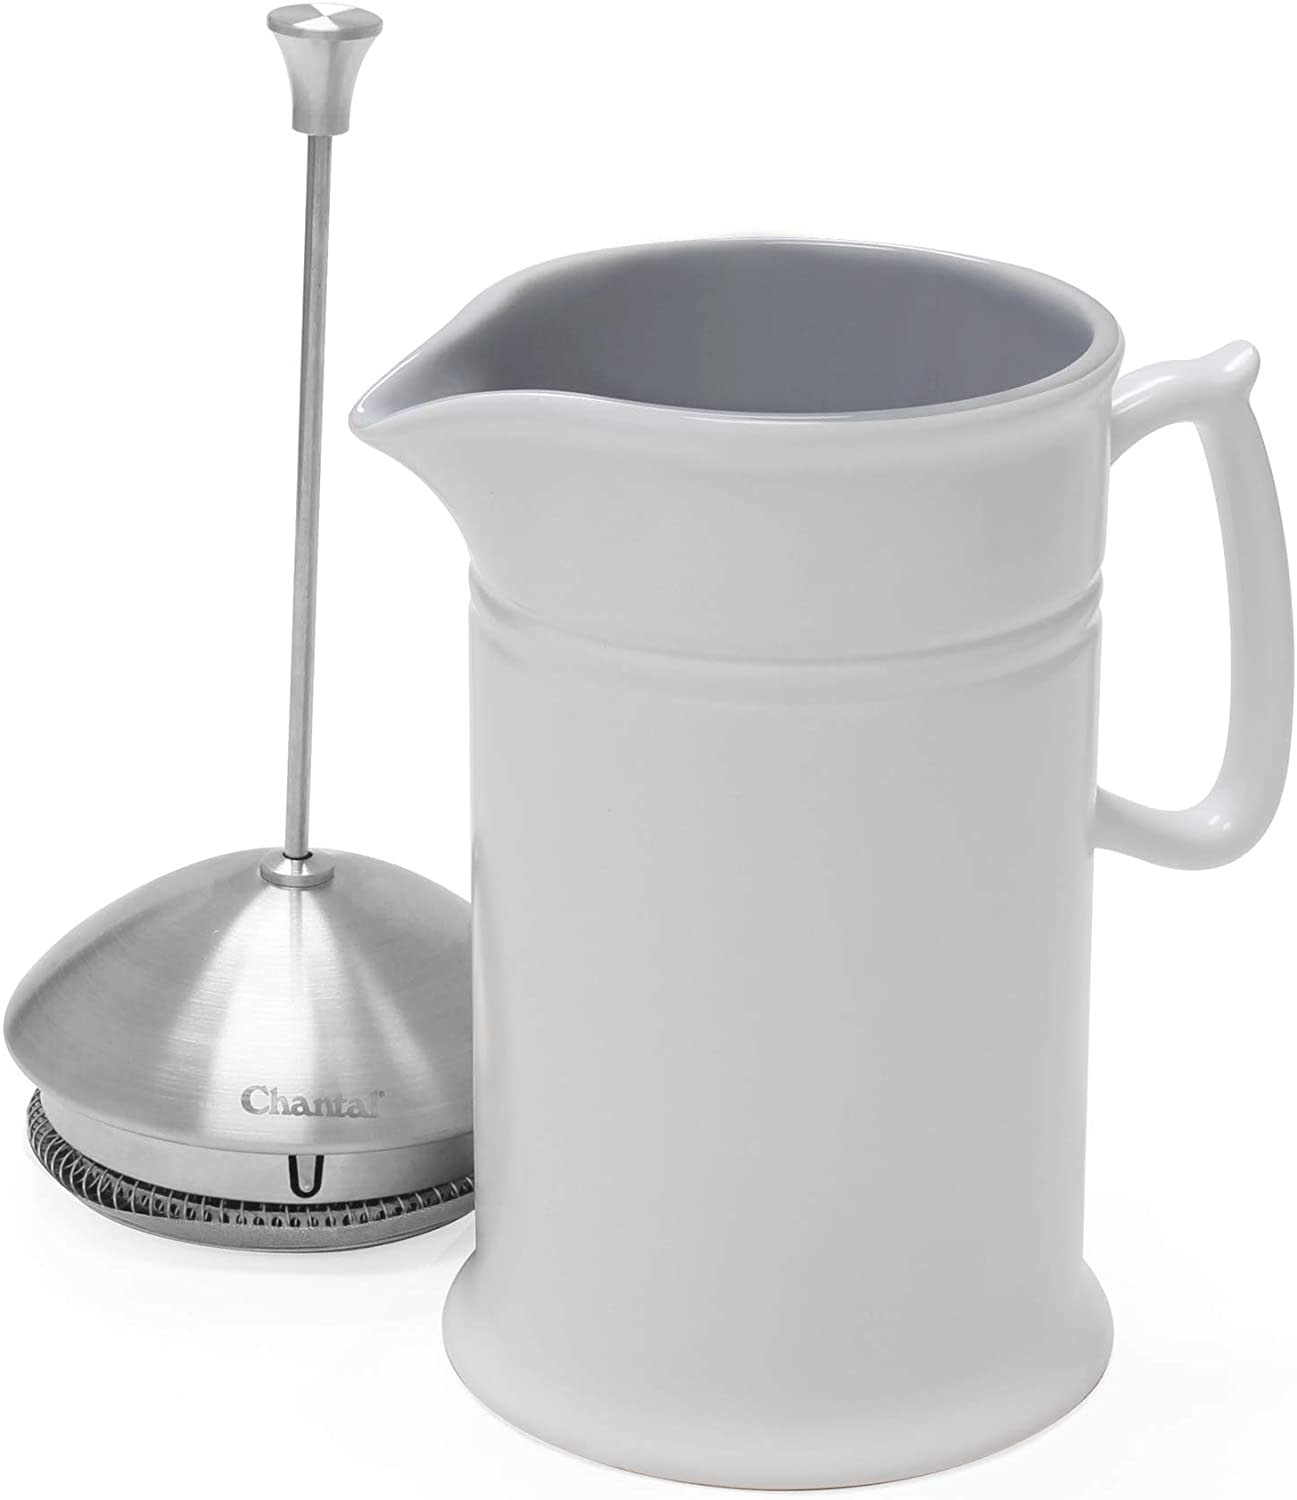 Chantal Ceramic French Press w/ Stainless Steel Plunger, Screen